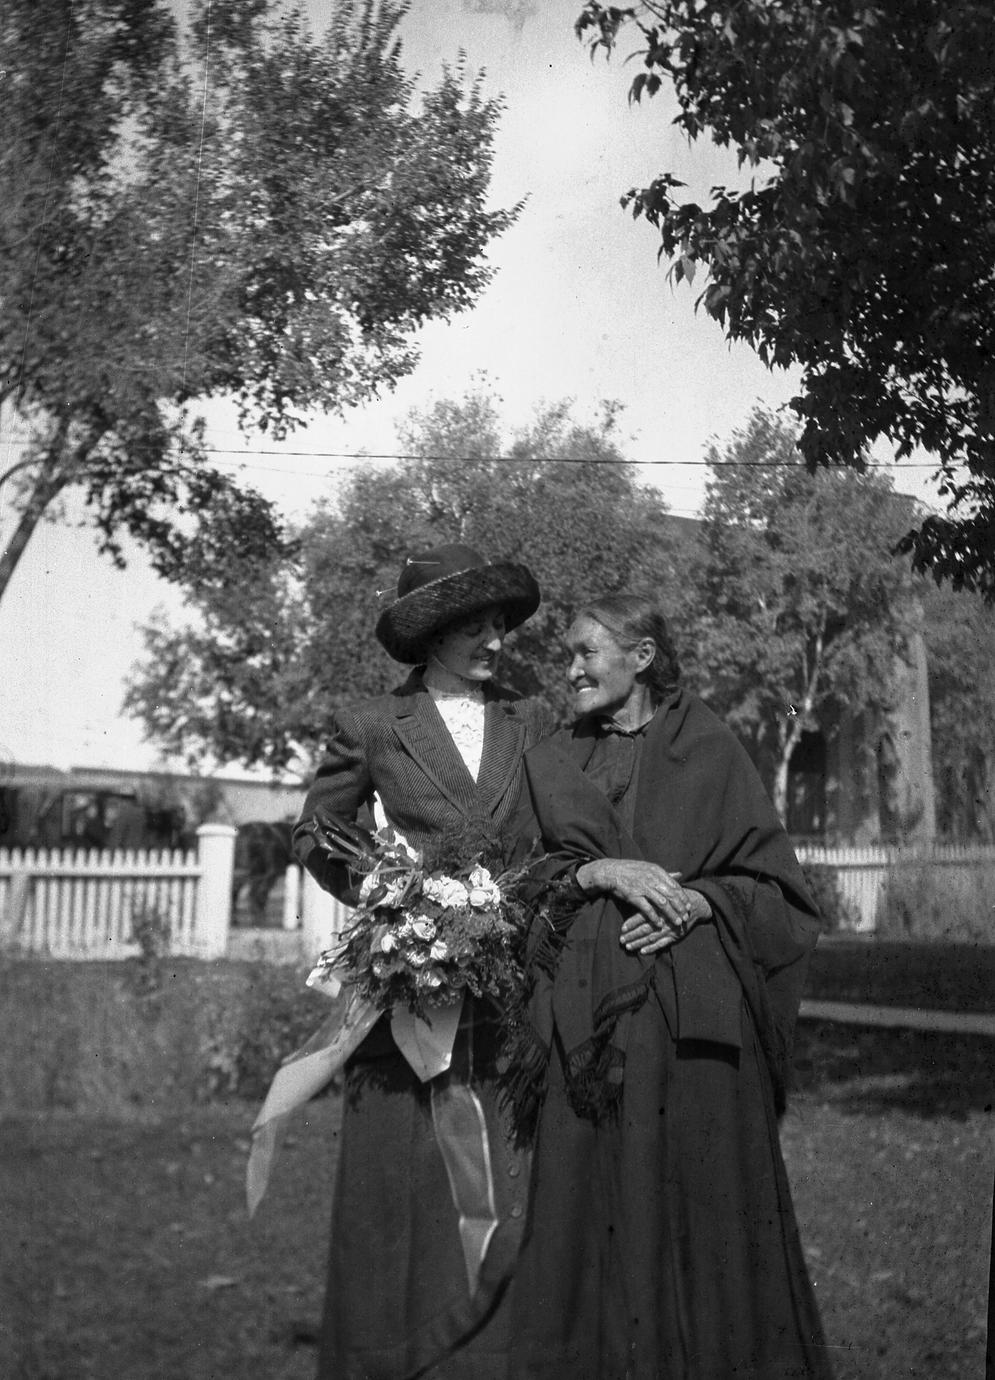 Estella Bergere Leopold with relative at wedding